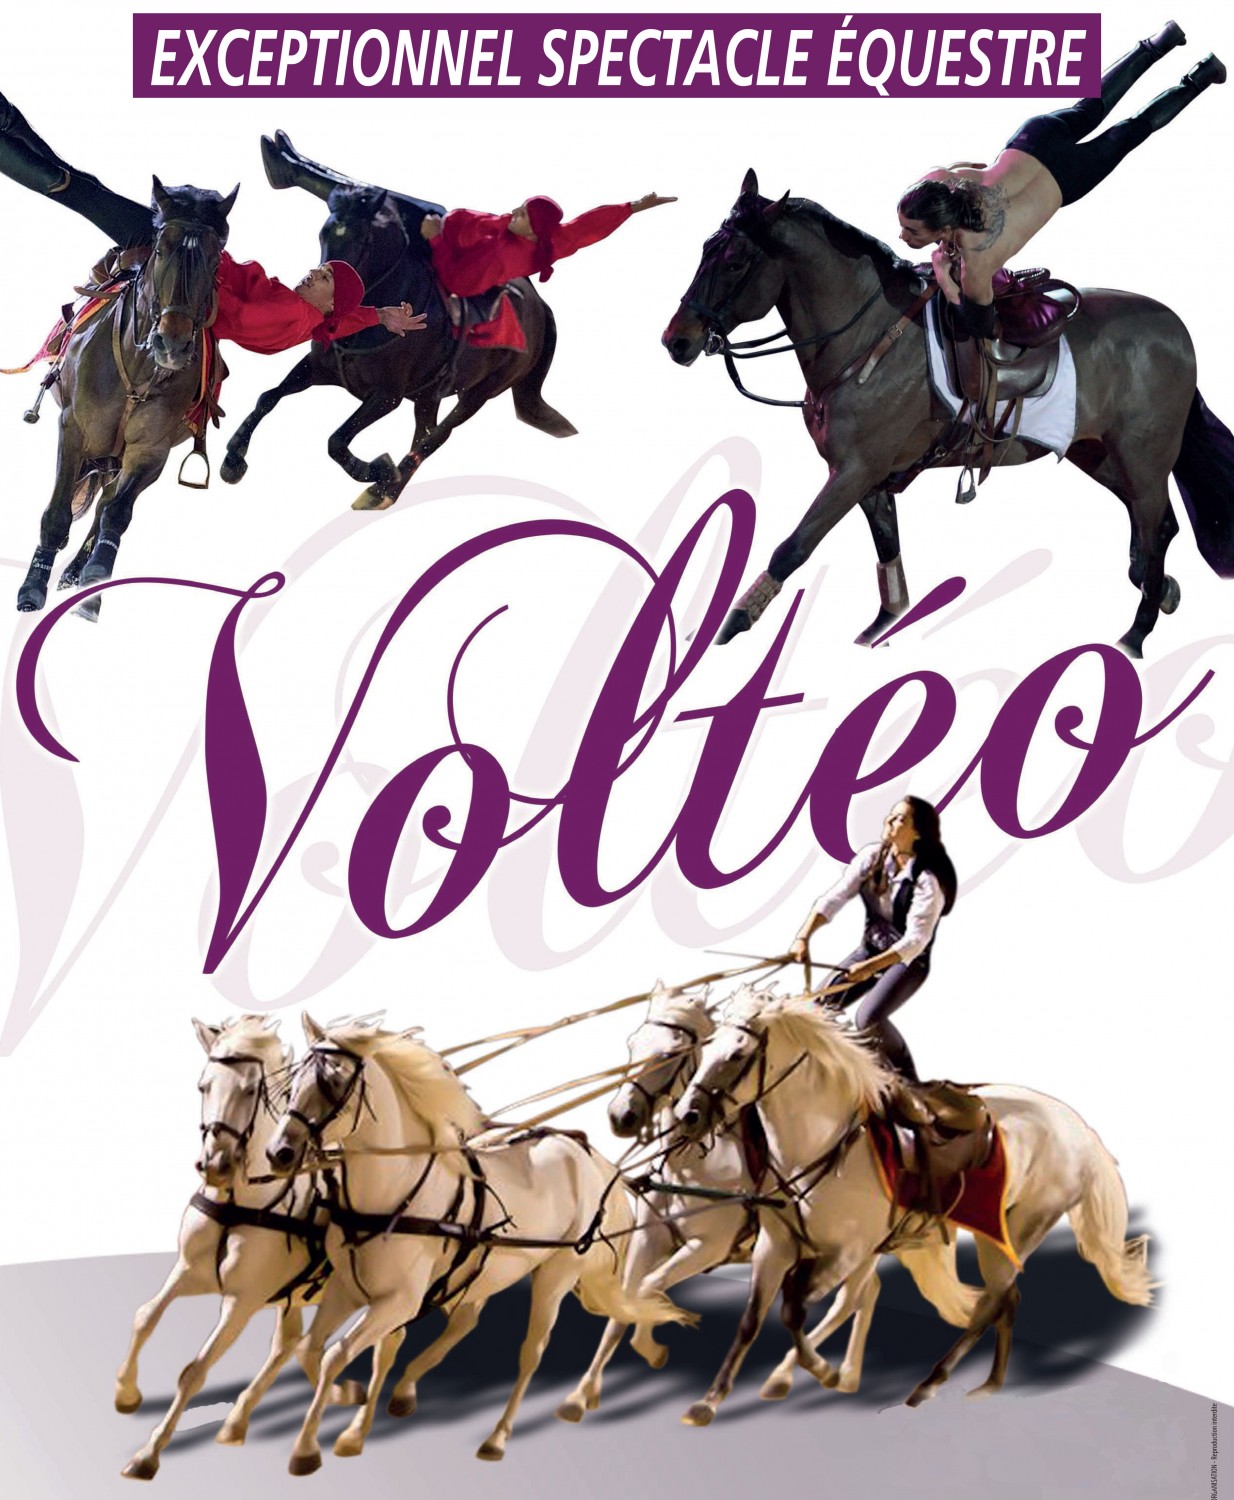 2019 06 17 175053 ill1 spectacle equestre volteopg